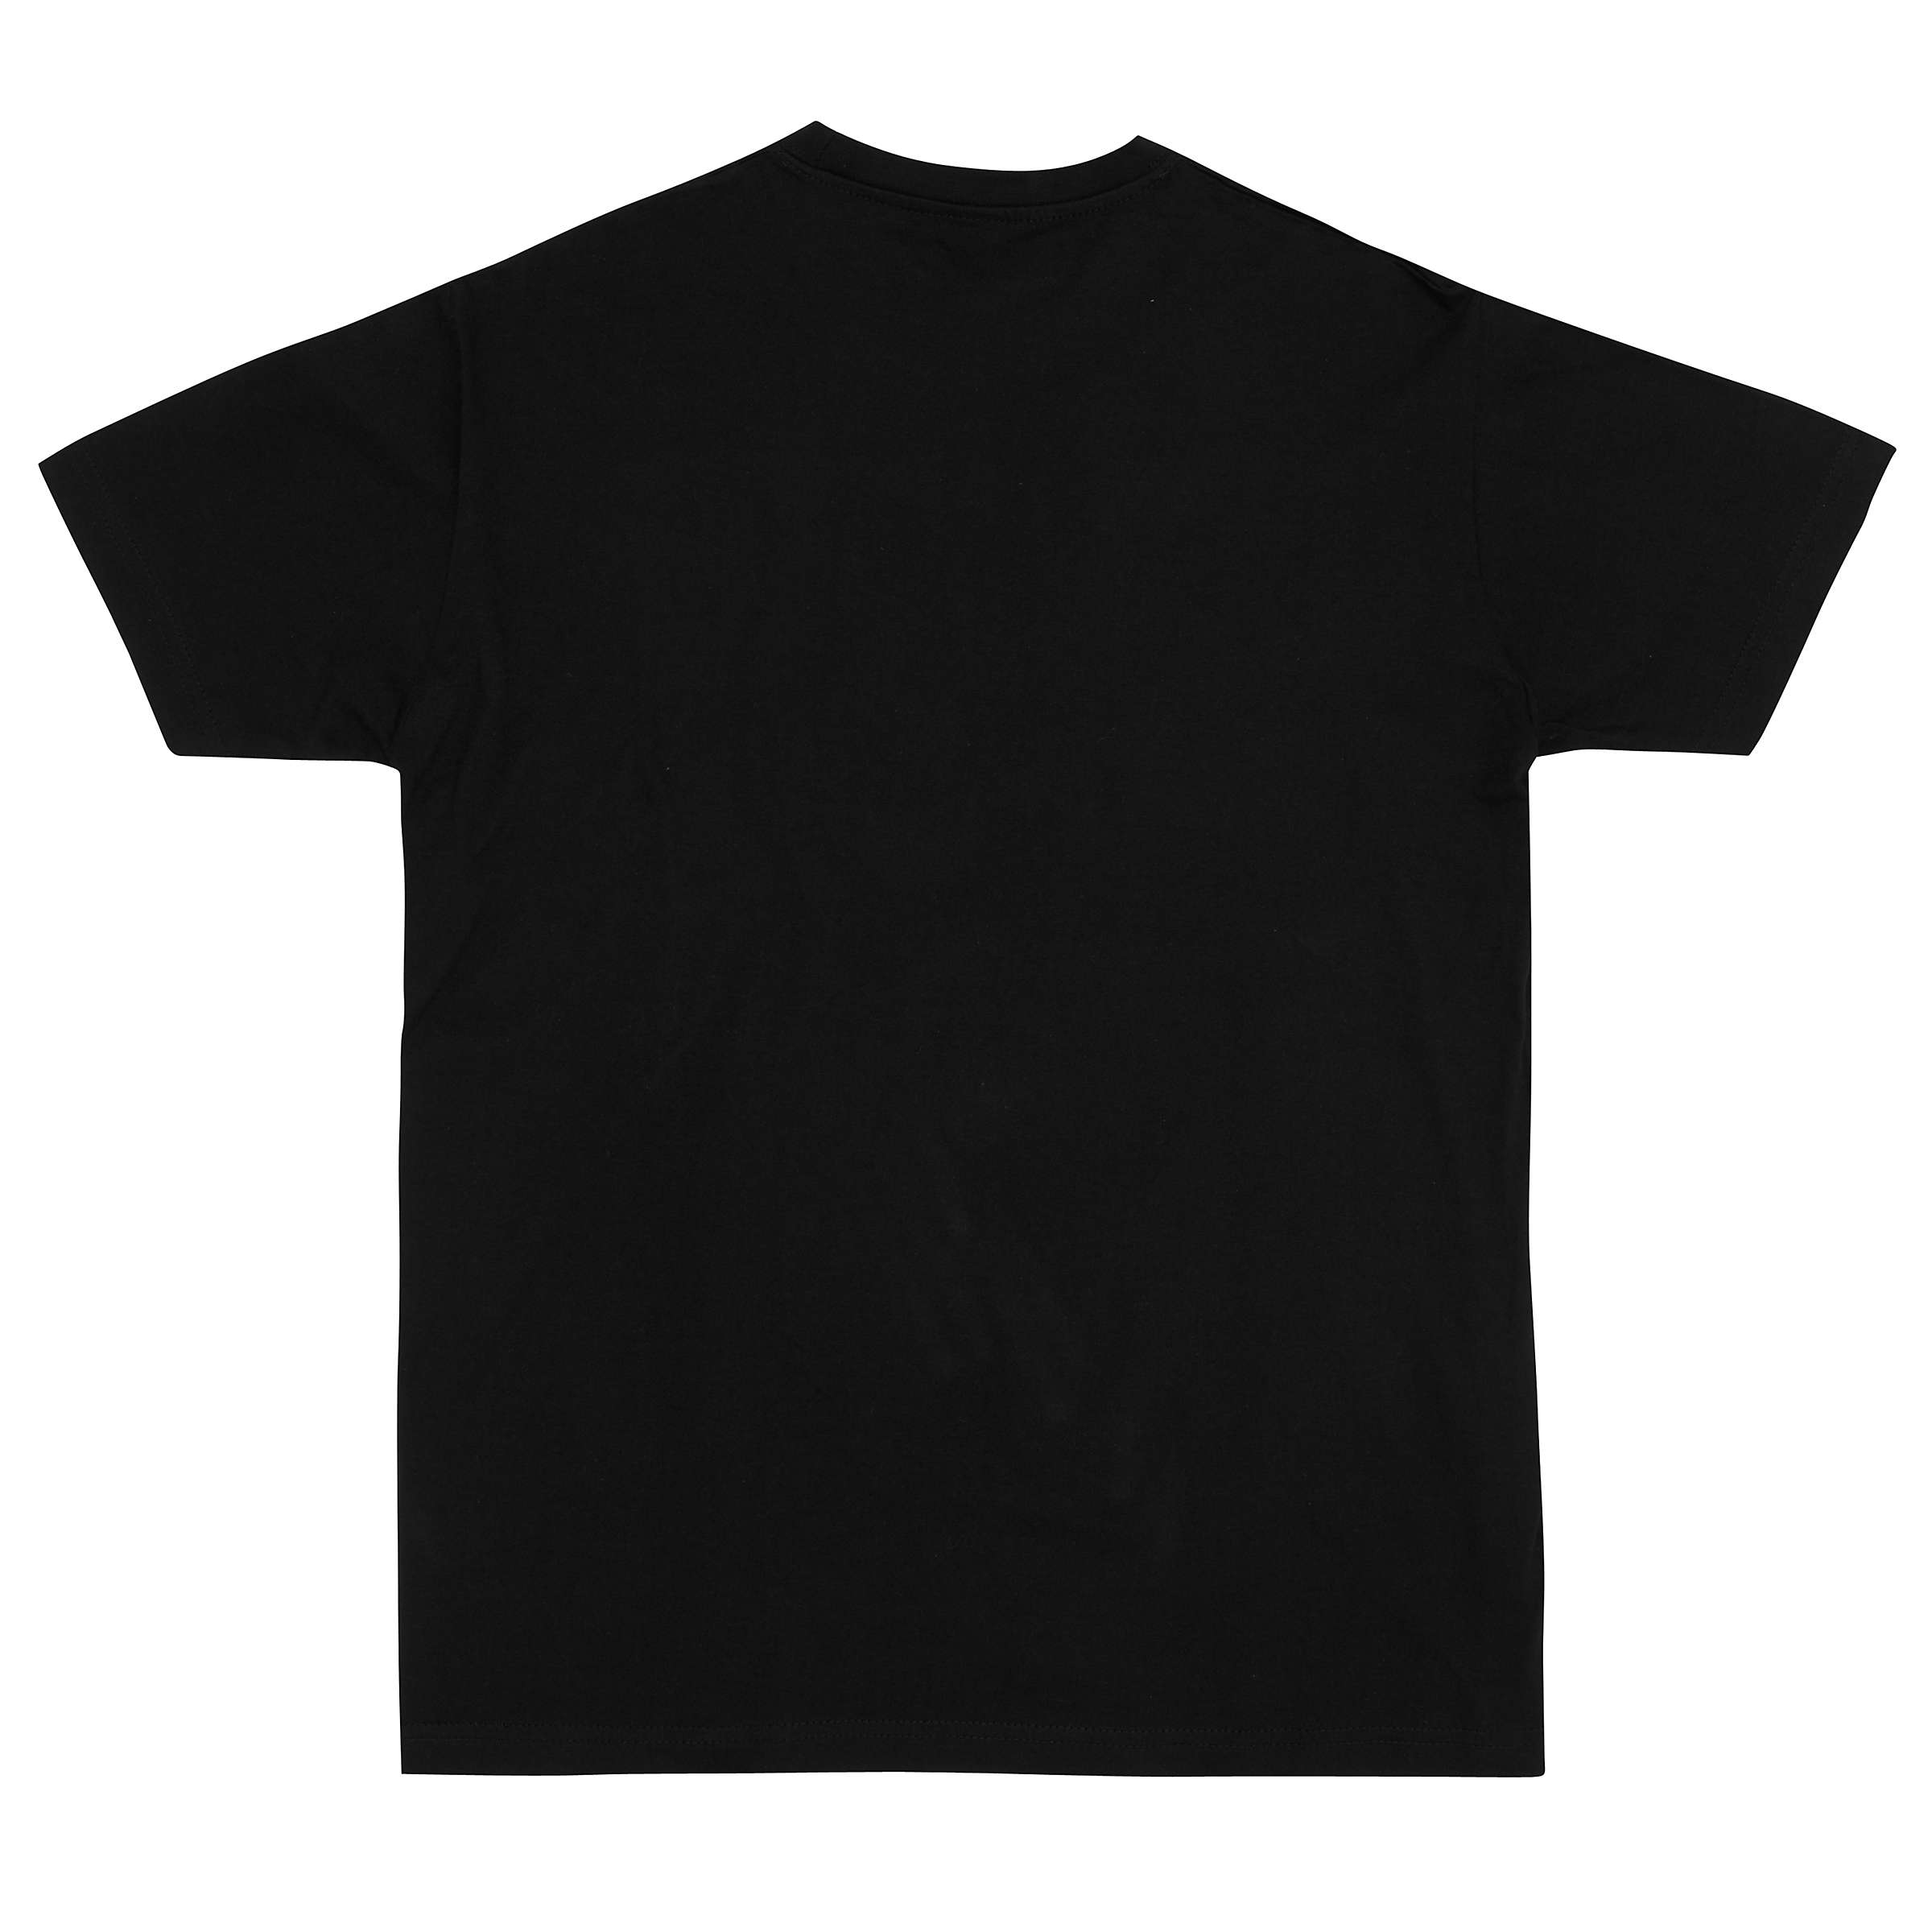 Buy Howell's College Unisex College T-Shirt, Black Online at johnlewis.com